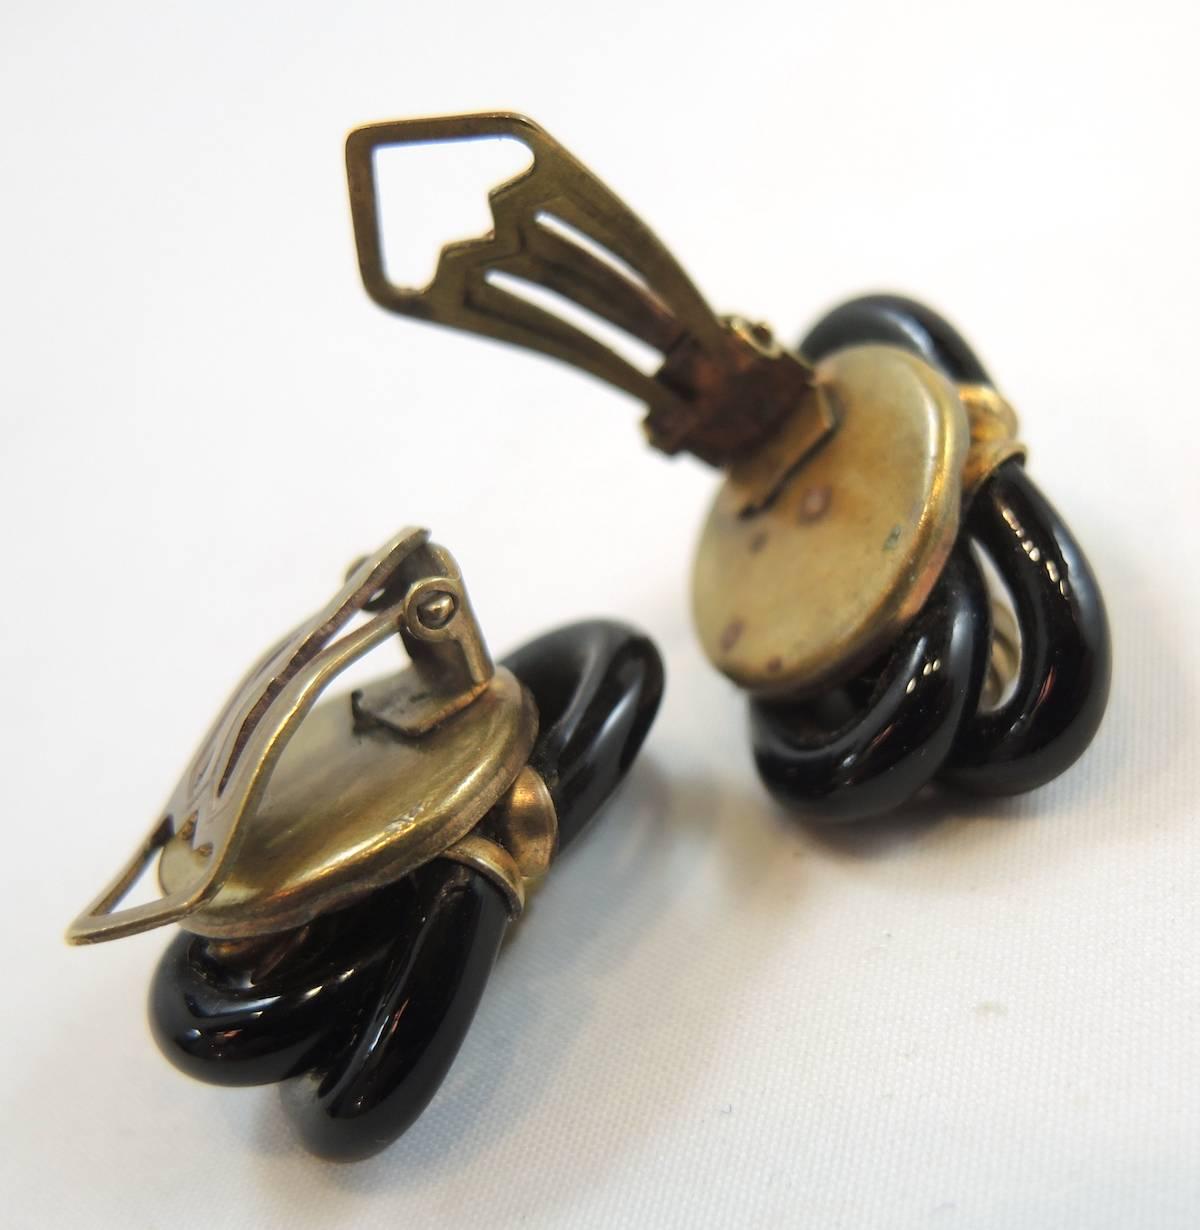 These amazing and rare earrings were designed by the famous Archimede Seguso for Chanel in the 1950s. They are designed with interlocking black glass and the glass design became an icon collectible. The center has a curved and domed shaped tube.